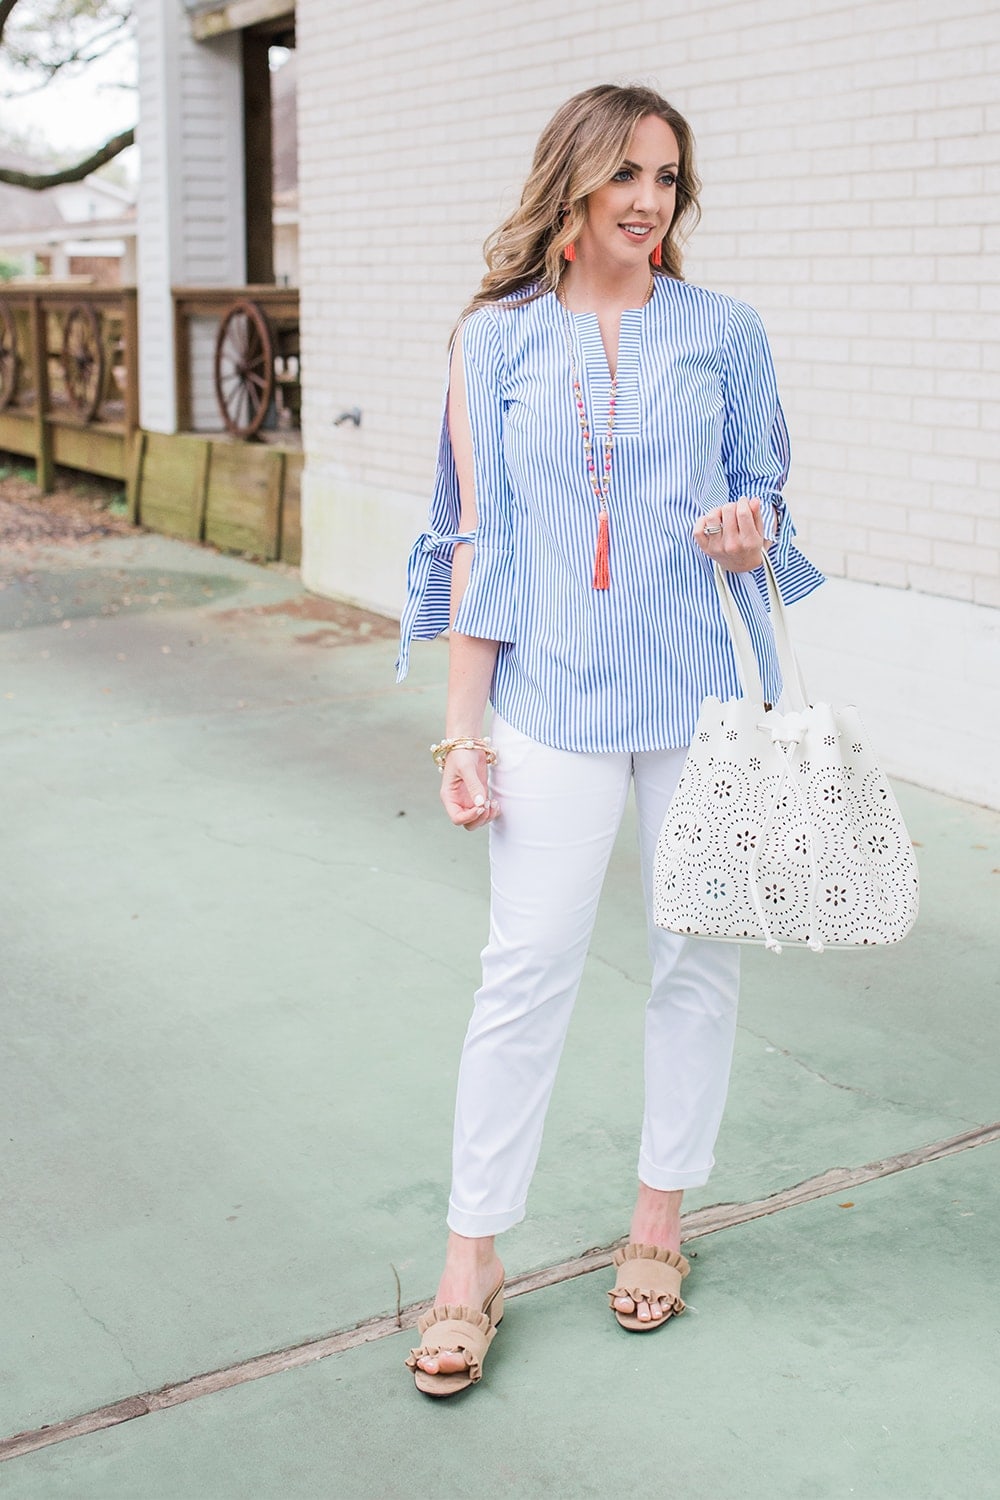 Houston blogger Meg O. on the Go shares a perfect spring outfit from the Avon Modern Southern Belle Collection from Avon